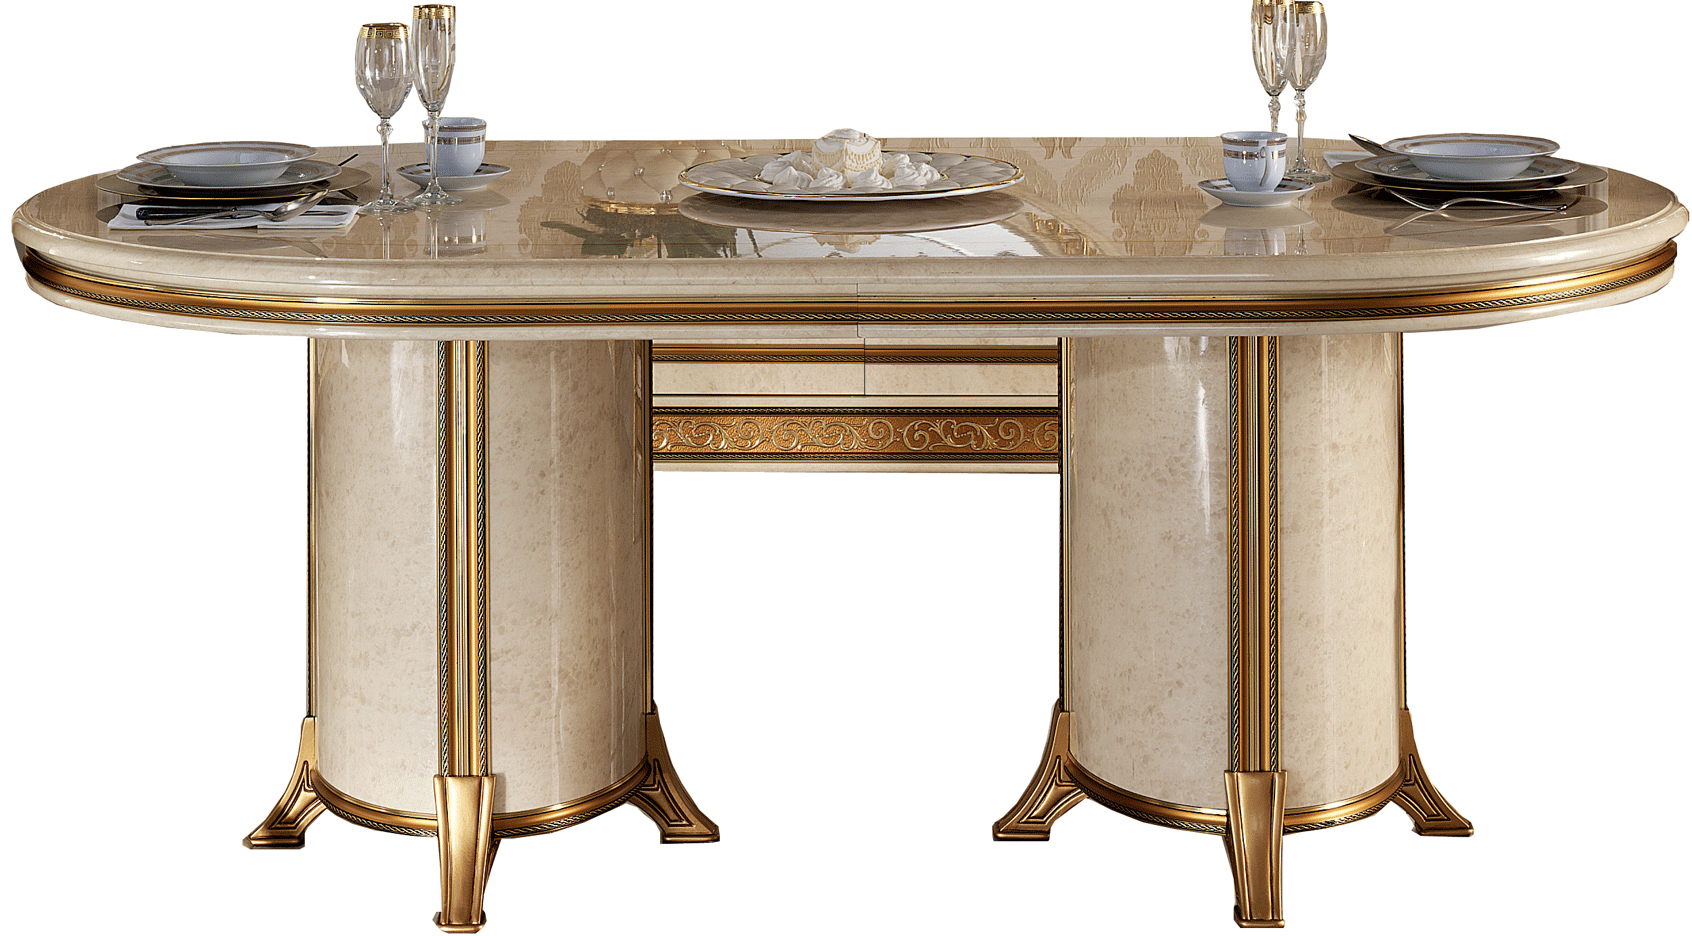 Brands Camel Classic Collection, Italy Melodia Dining Table